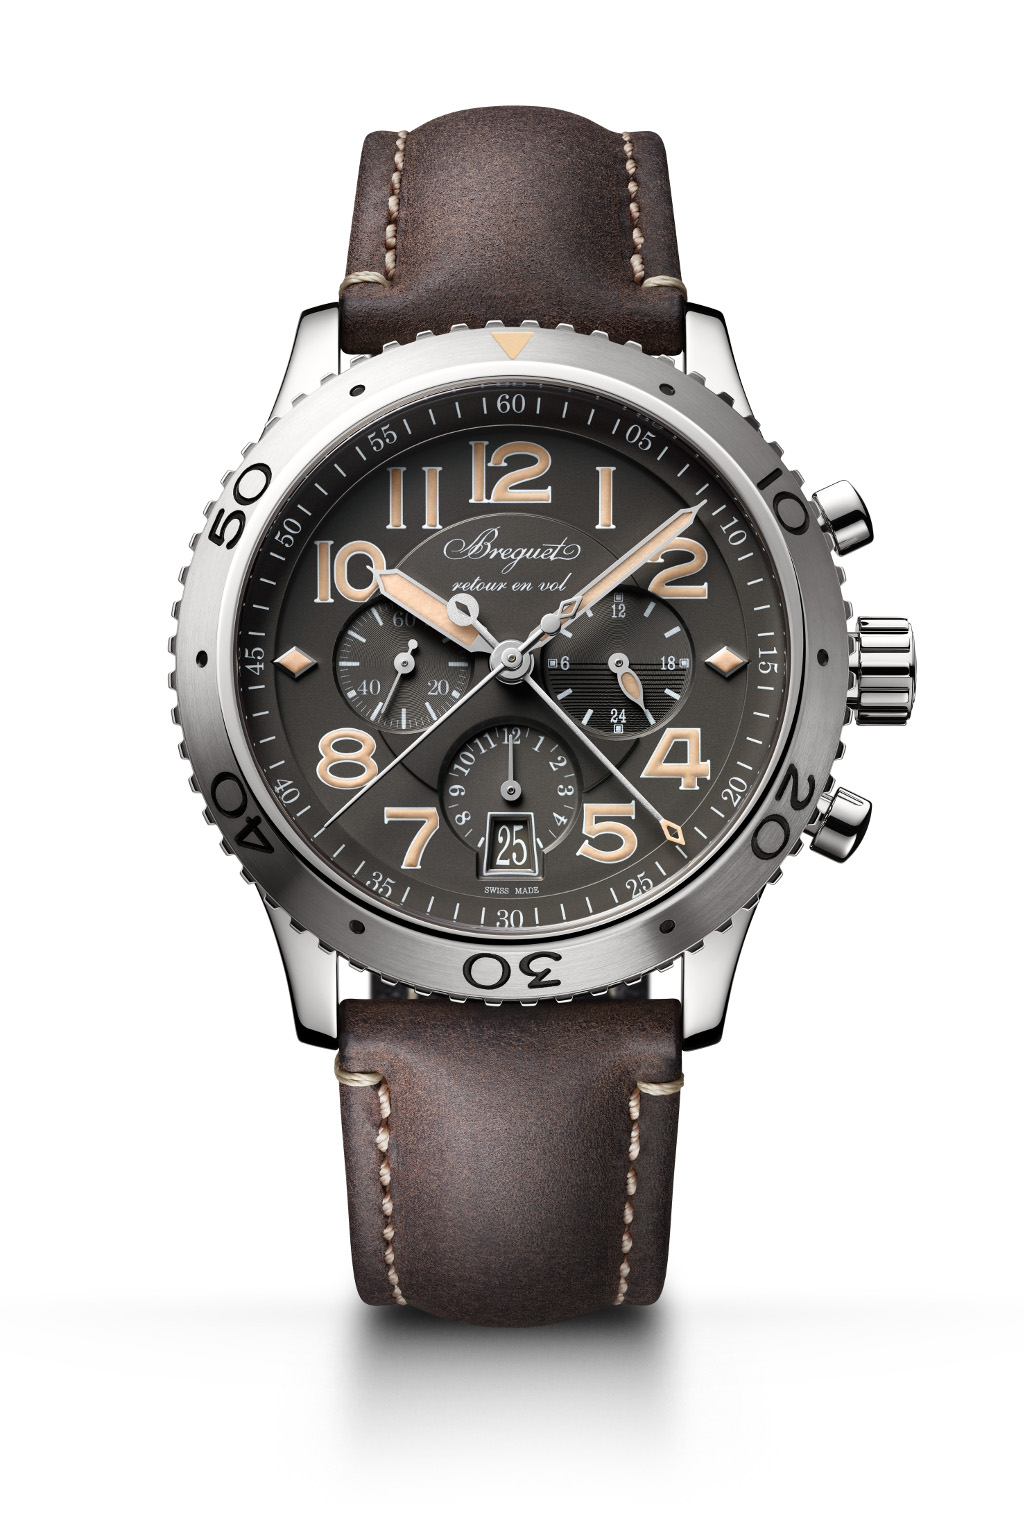 The new Breguet Type XXI 3817, with inspirations taken from the watchmaker's historical archives.